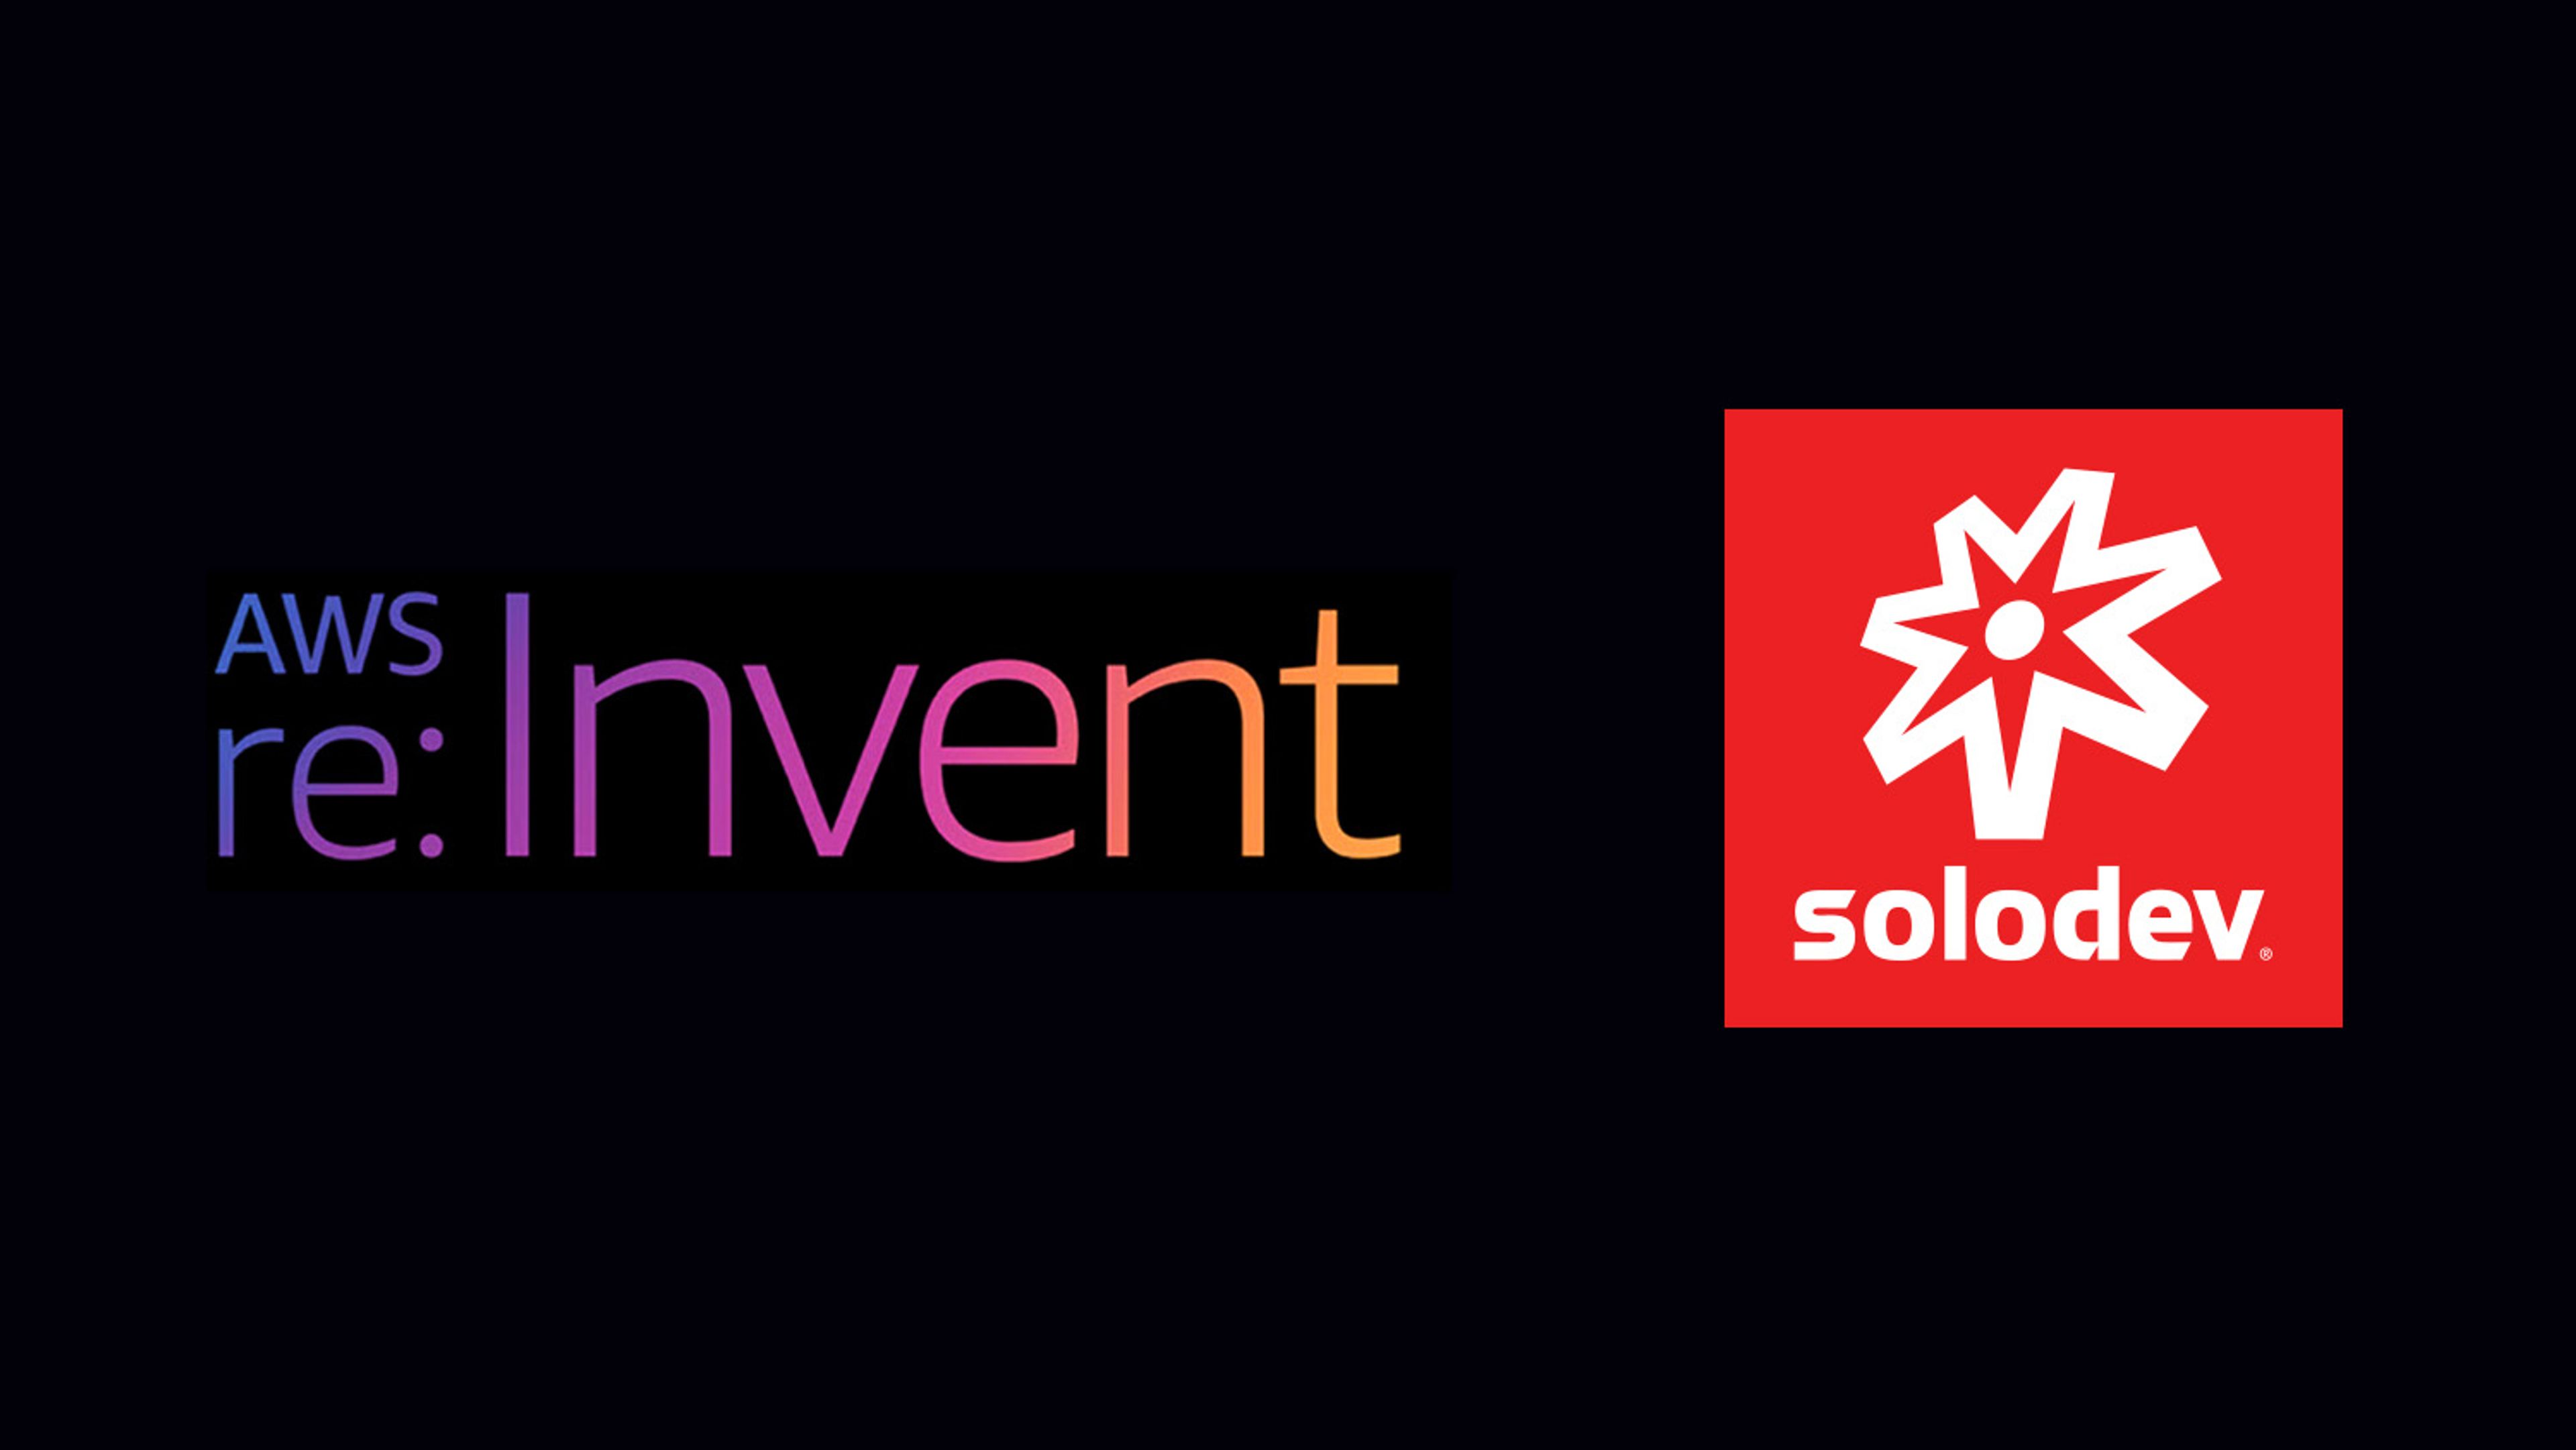 Image of AWS reinvent logo and Solodev logo against a black background